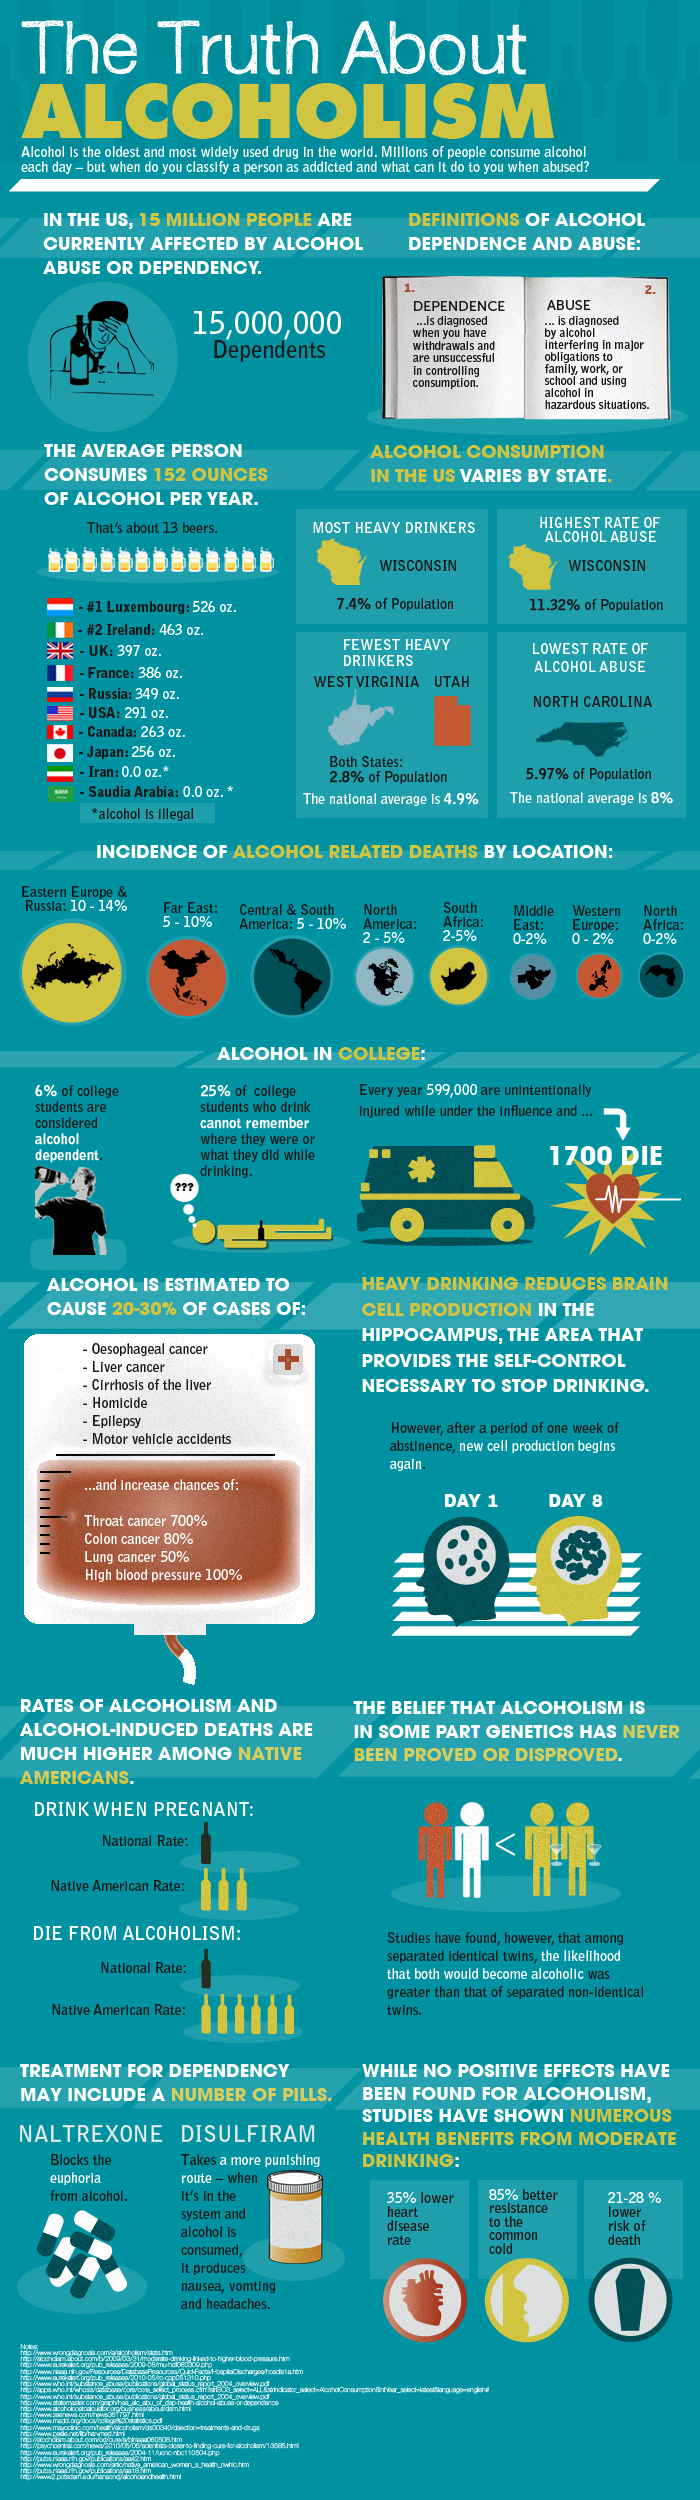 The Truth About Alcoholism Infographic